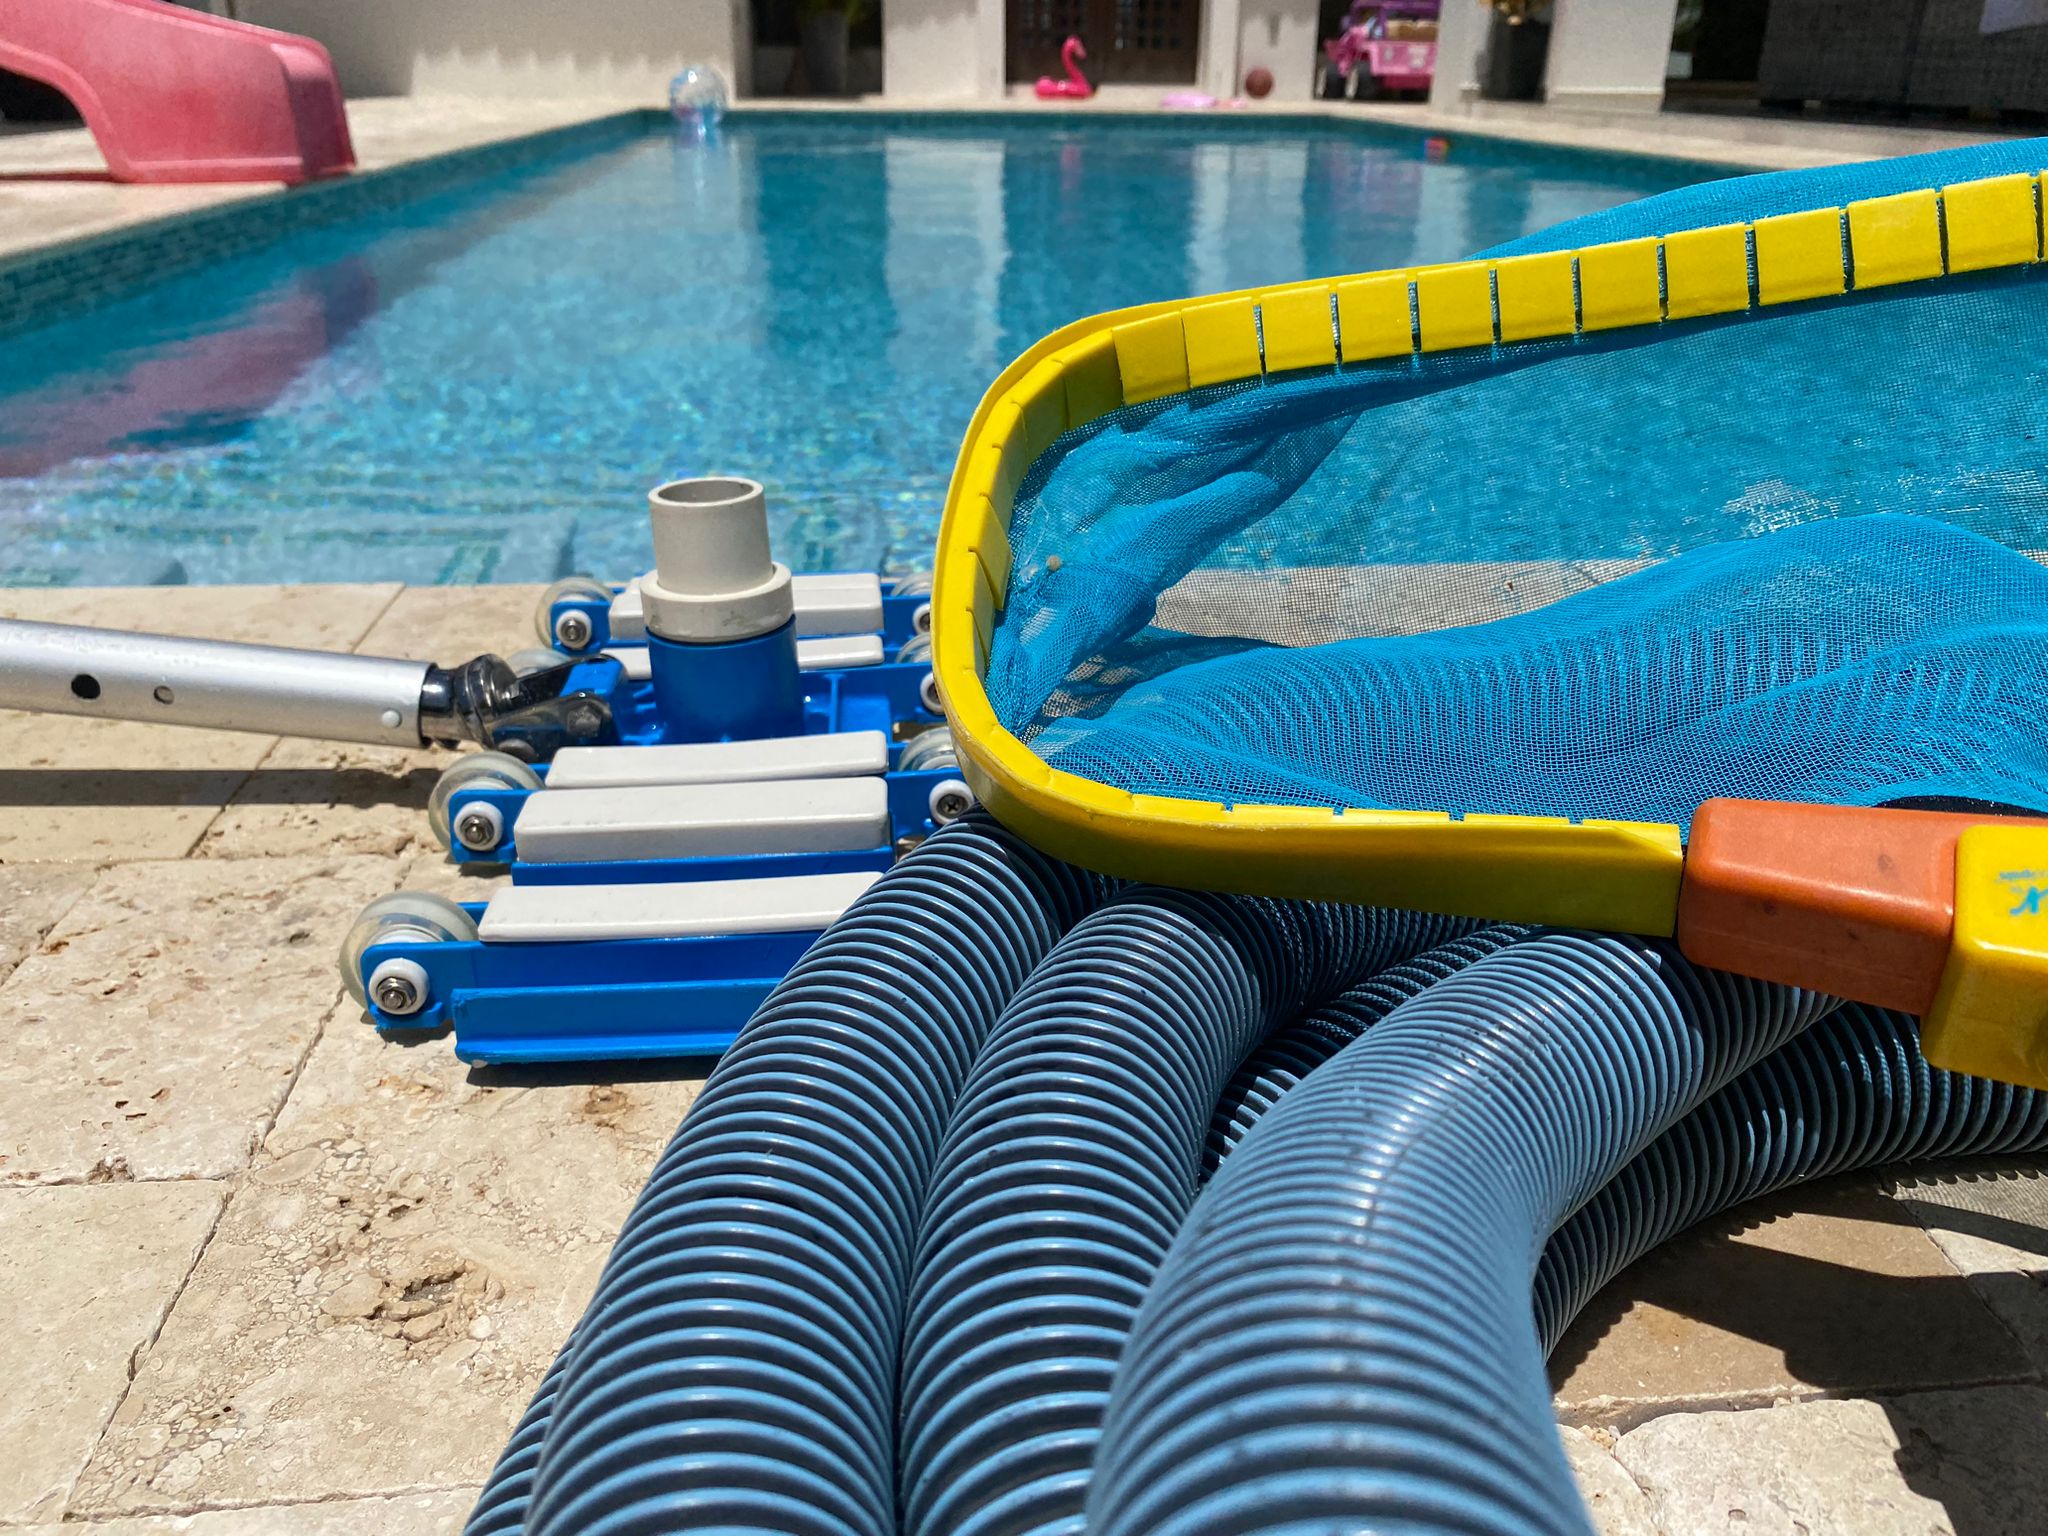 swimming pool cleaning equipment next to pool